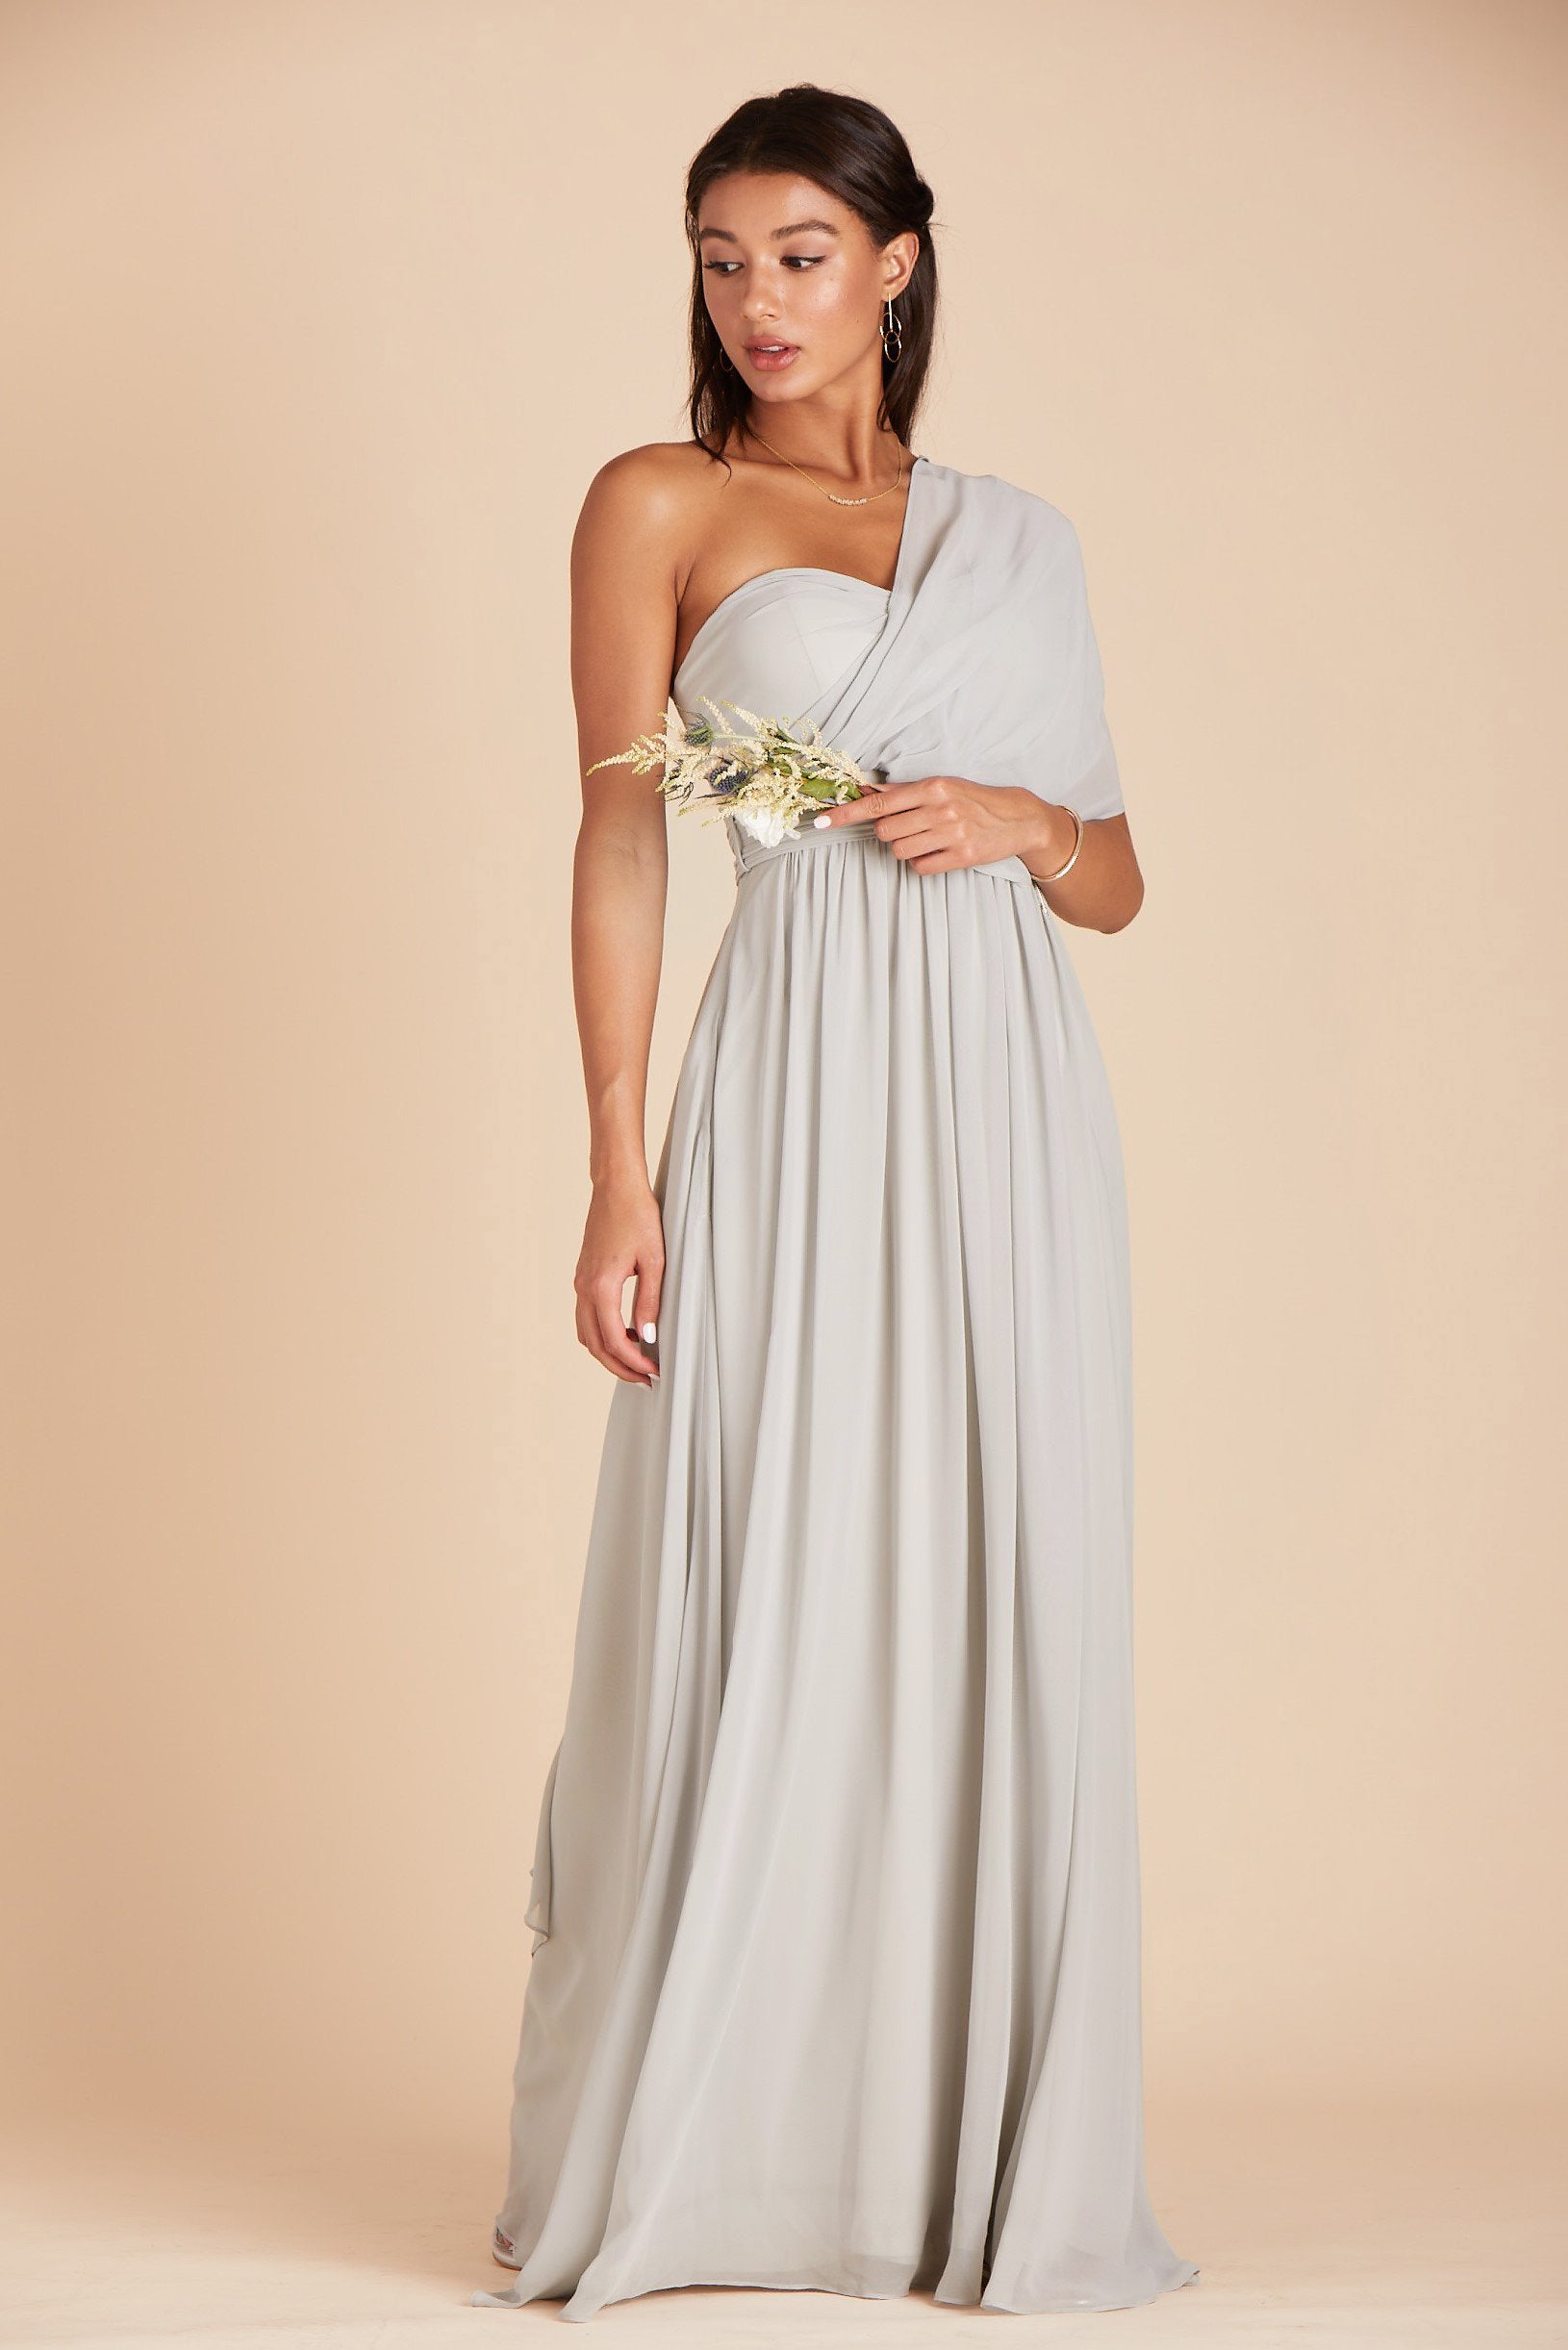 Grace convertible bridesmaid dress in dove gray chiffon by Birdy Grey, front view